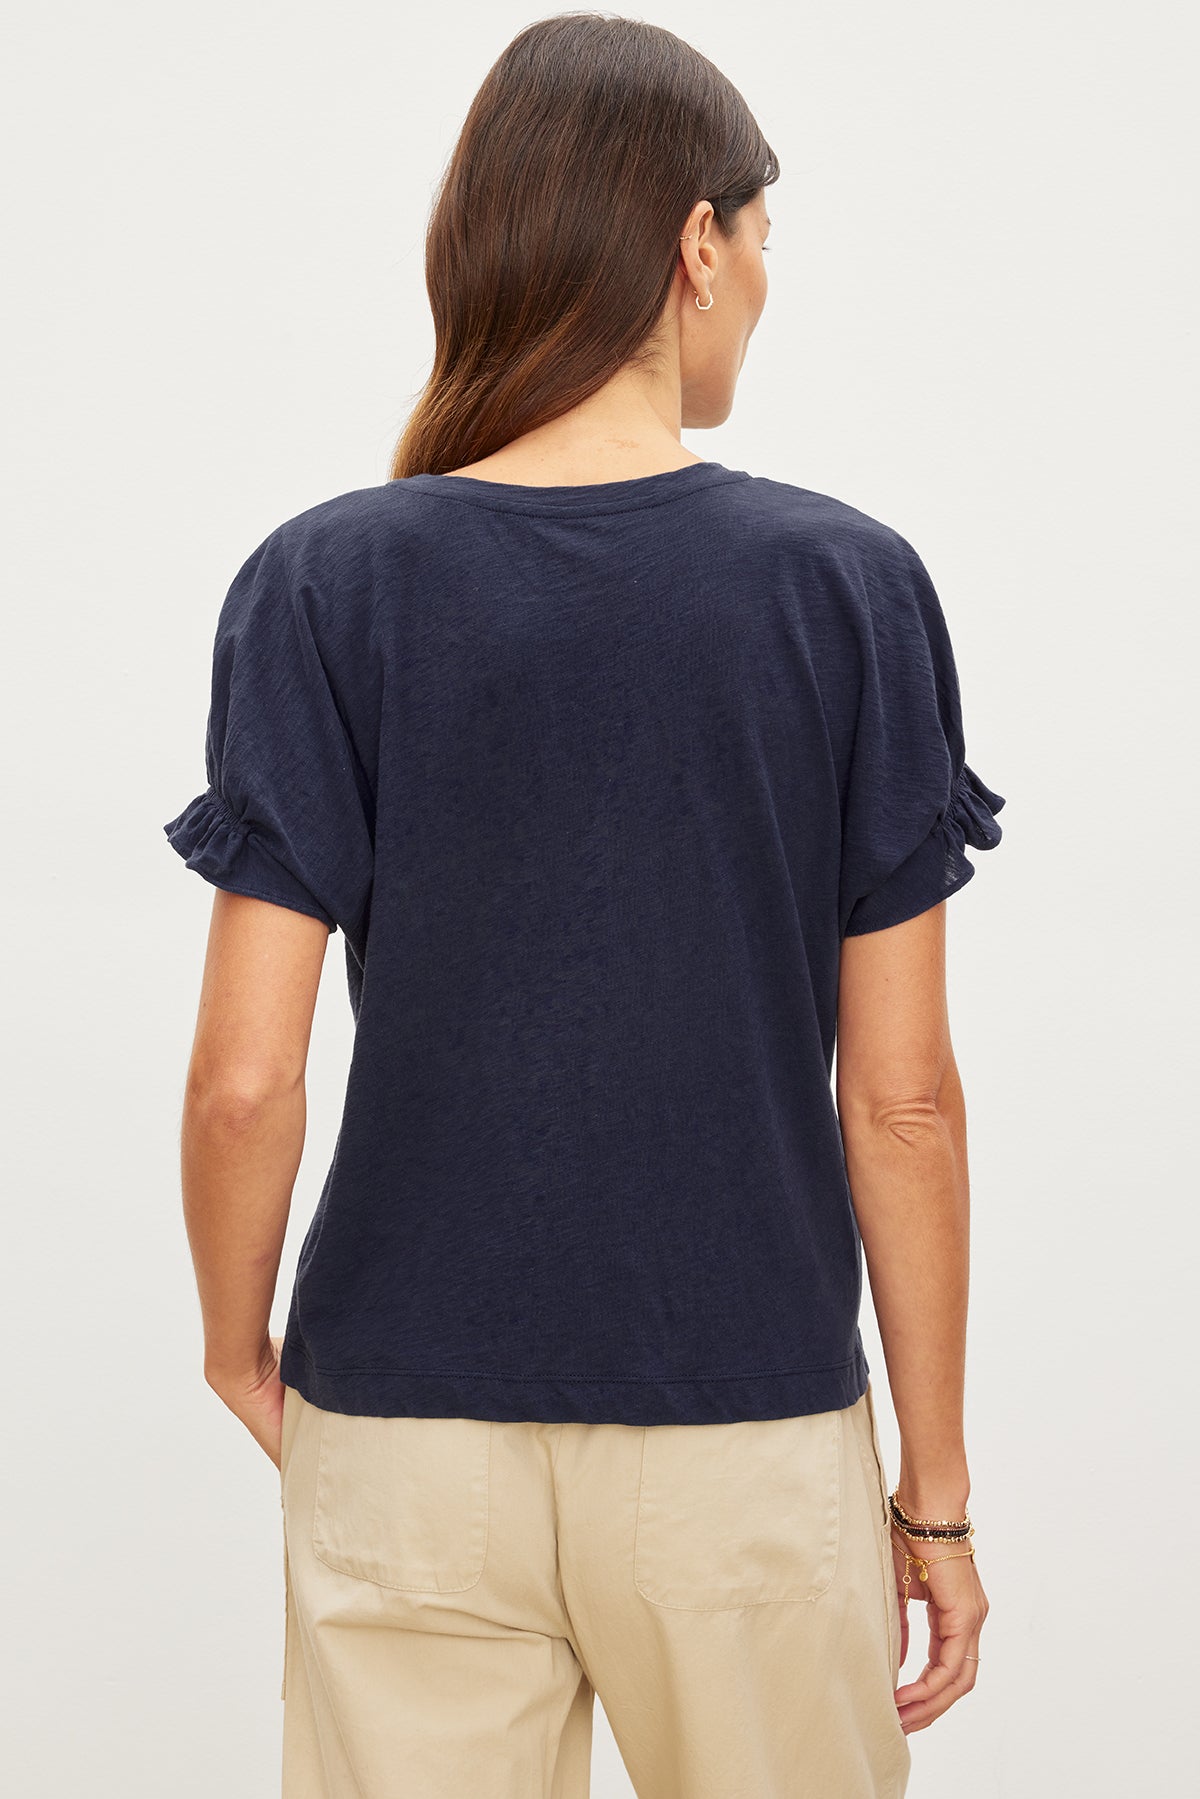 The back view of a woman wearing a MIMI CREW NECK TEE, a wardrobe essential with its cotton slub fabric and crew neckline, by Velvet by Graham & Spencer.-35967543902401